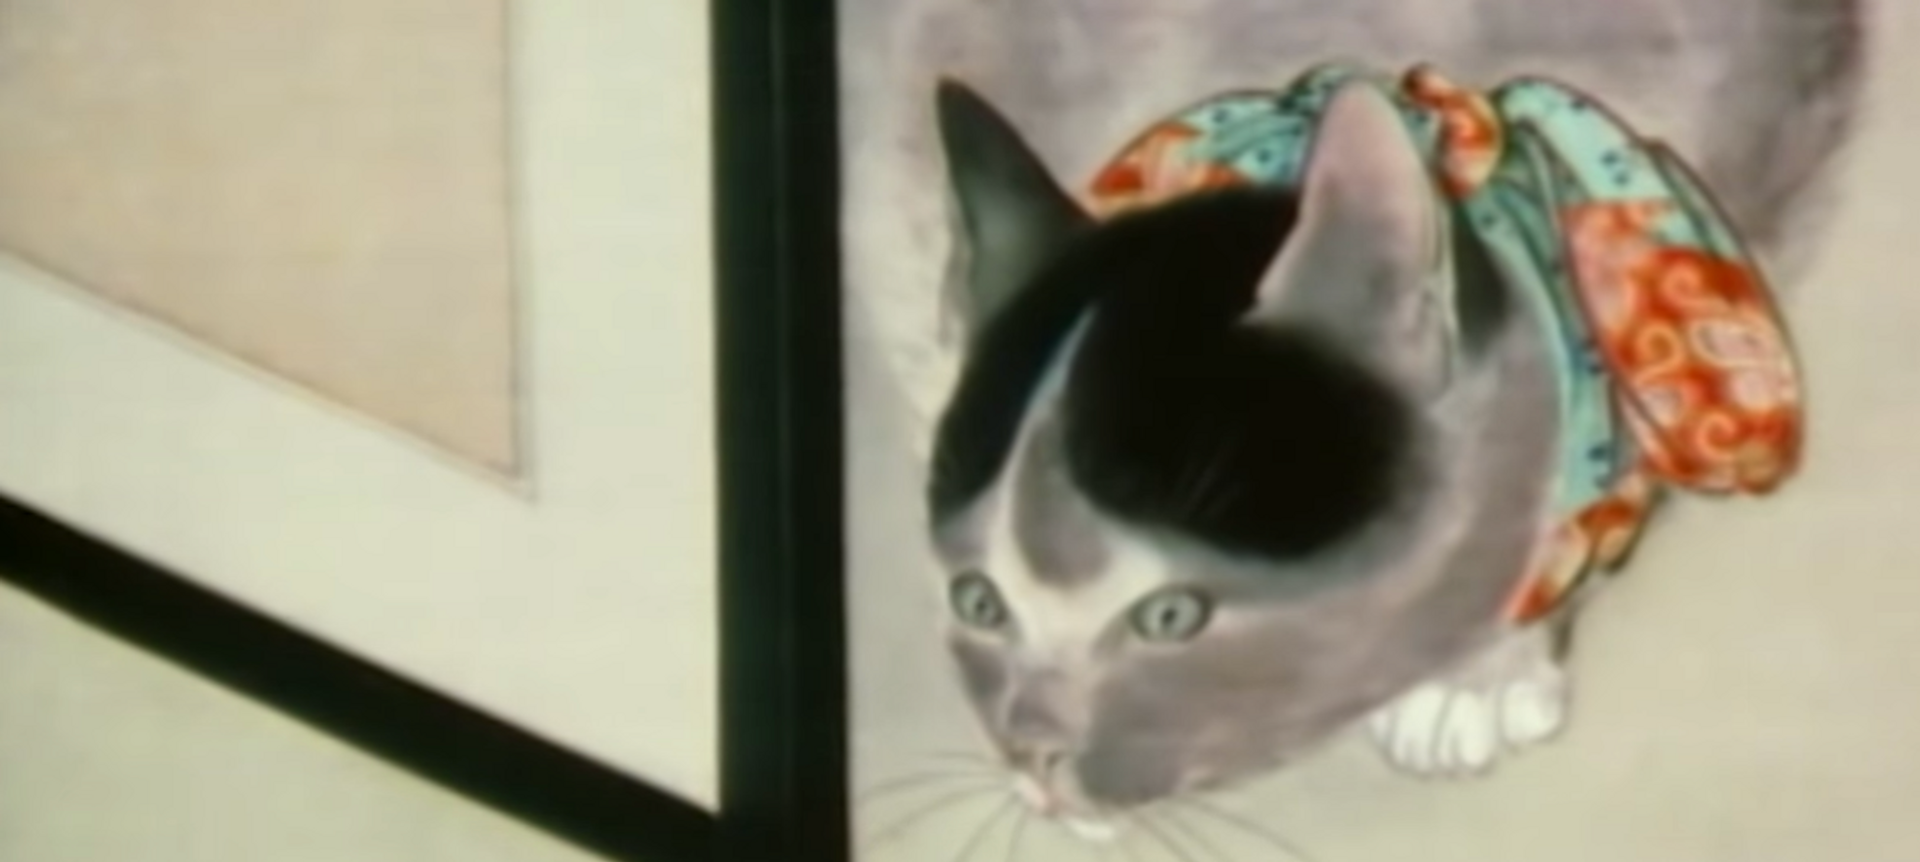 A still from the Metropolitan Museum of Art's Youtube video Metropolitan Cats, 1983—A History of Cats at The Met A still from the Metropolitan Museum of Art's Youtube video Metropolitan Cats, 1983—A History of Cats at The Met